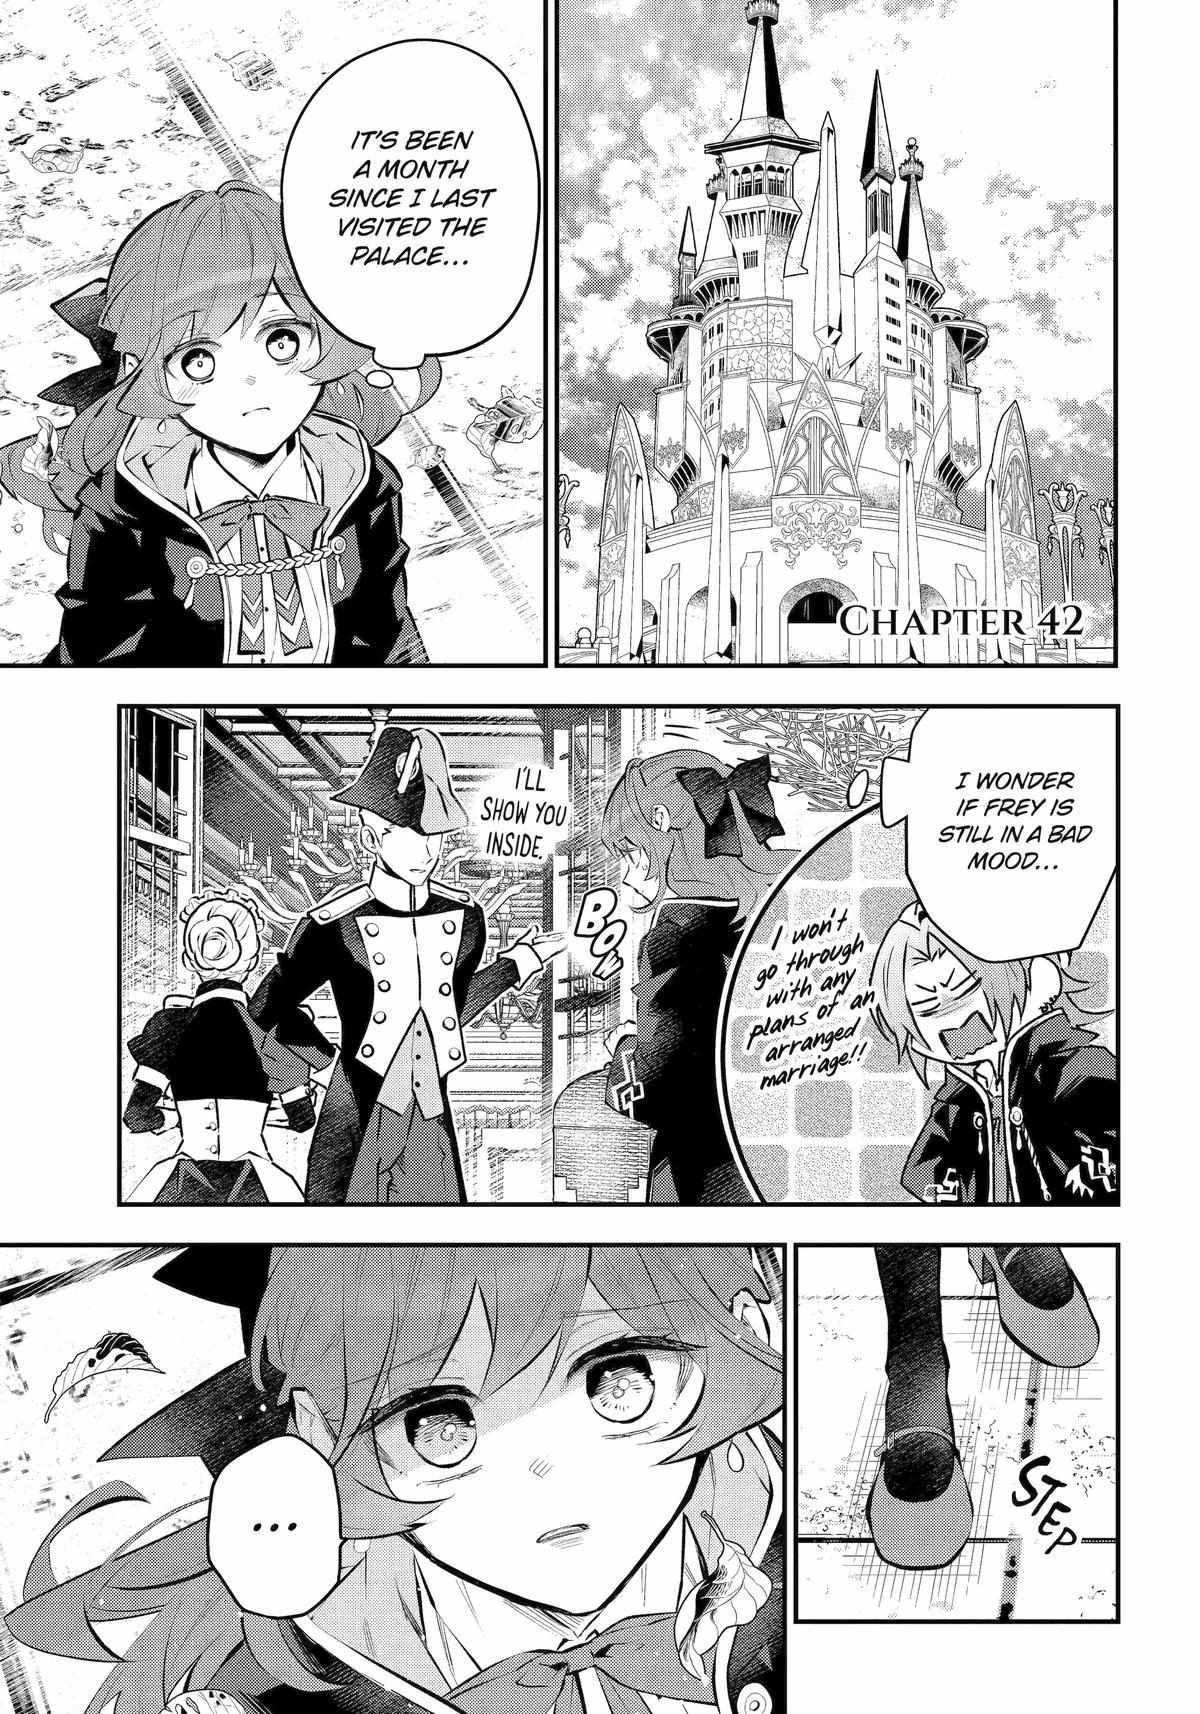 Tales Of Reincarnation In Maydare - The World's Worst Witch - 42 page 1-8cf4eb50